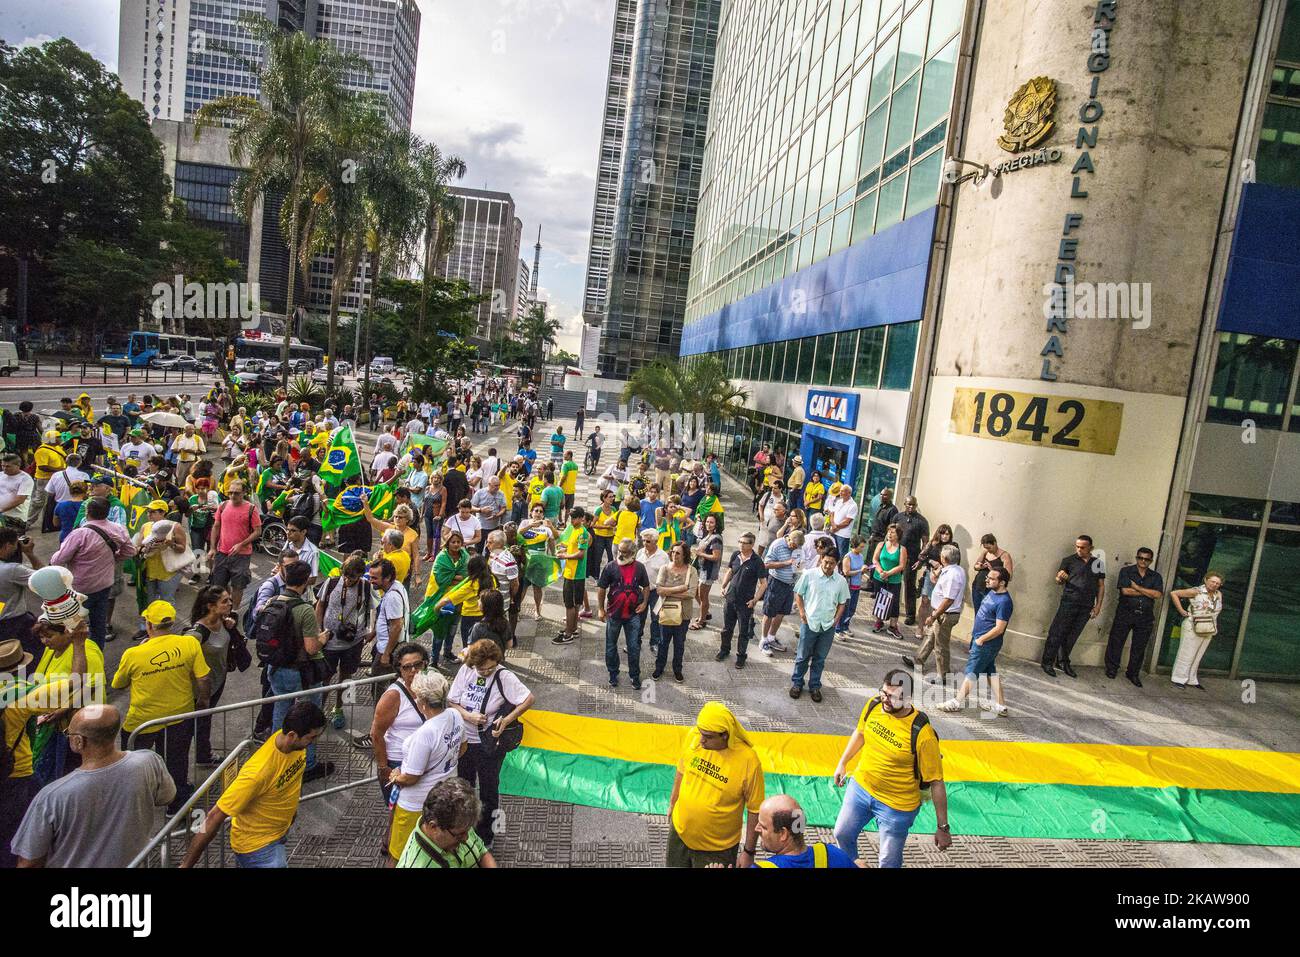 Members of the Movement Vem Pra Rua (Come to the Street) demonstrate against former President Luiz Inacio Lula da Silva outside the Federal Regional Court building in Sao Paulo, Brazil, on January 23, 2018. Lula was sentenced in July 2017 to 9.5 years behind bars after being convicted of corruption in Brazil's huge 'Car Wash' graft scandal. The court in Porto Alegre said it will rule on his appeal on January 24. That could decide whether Lula -- hugely popular during his 2001-2010 two-term presidency -- can take part in the October 2018 presidential elections in which he is currently the front Stock Photo